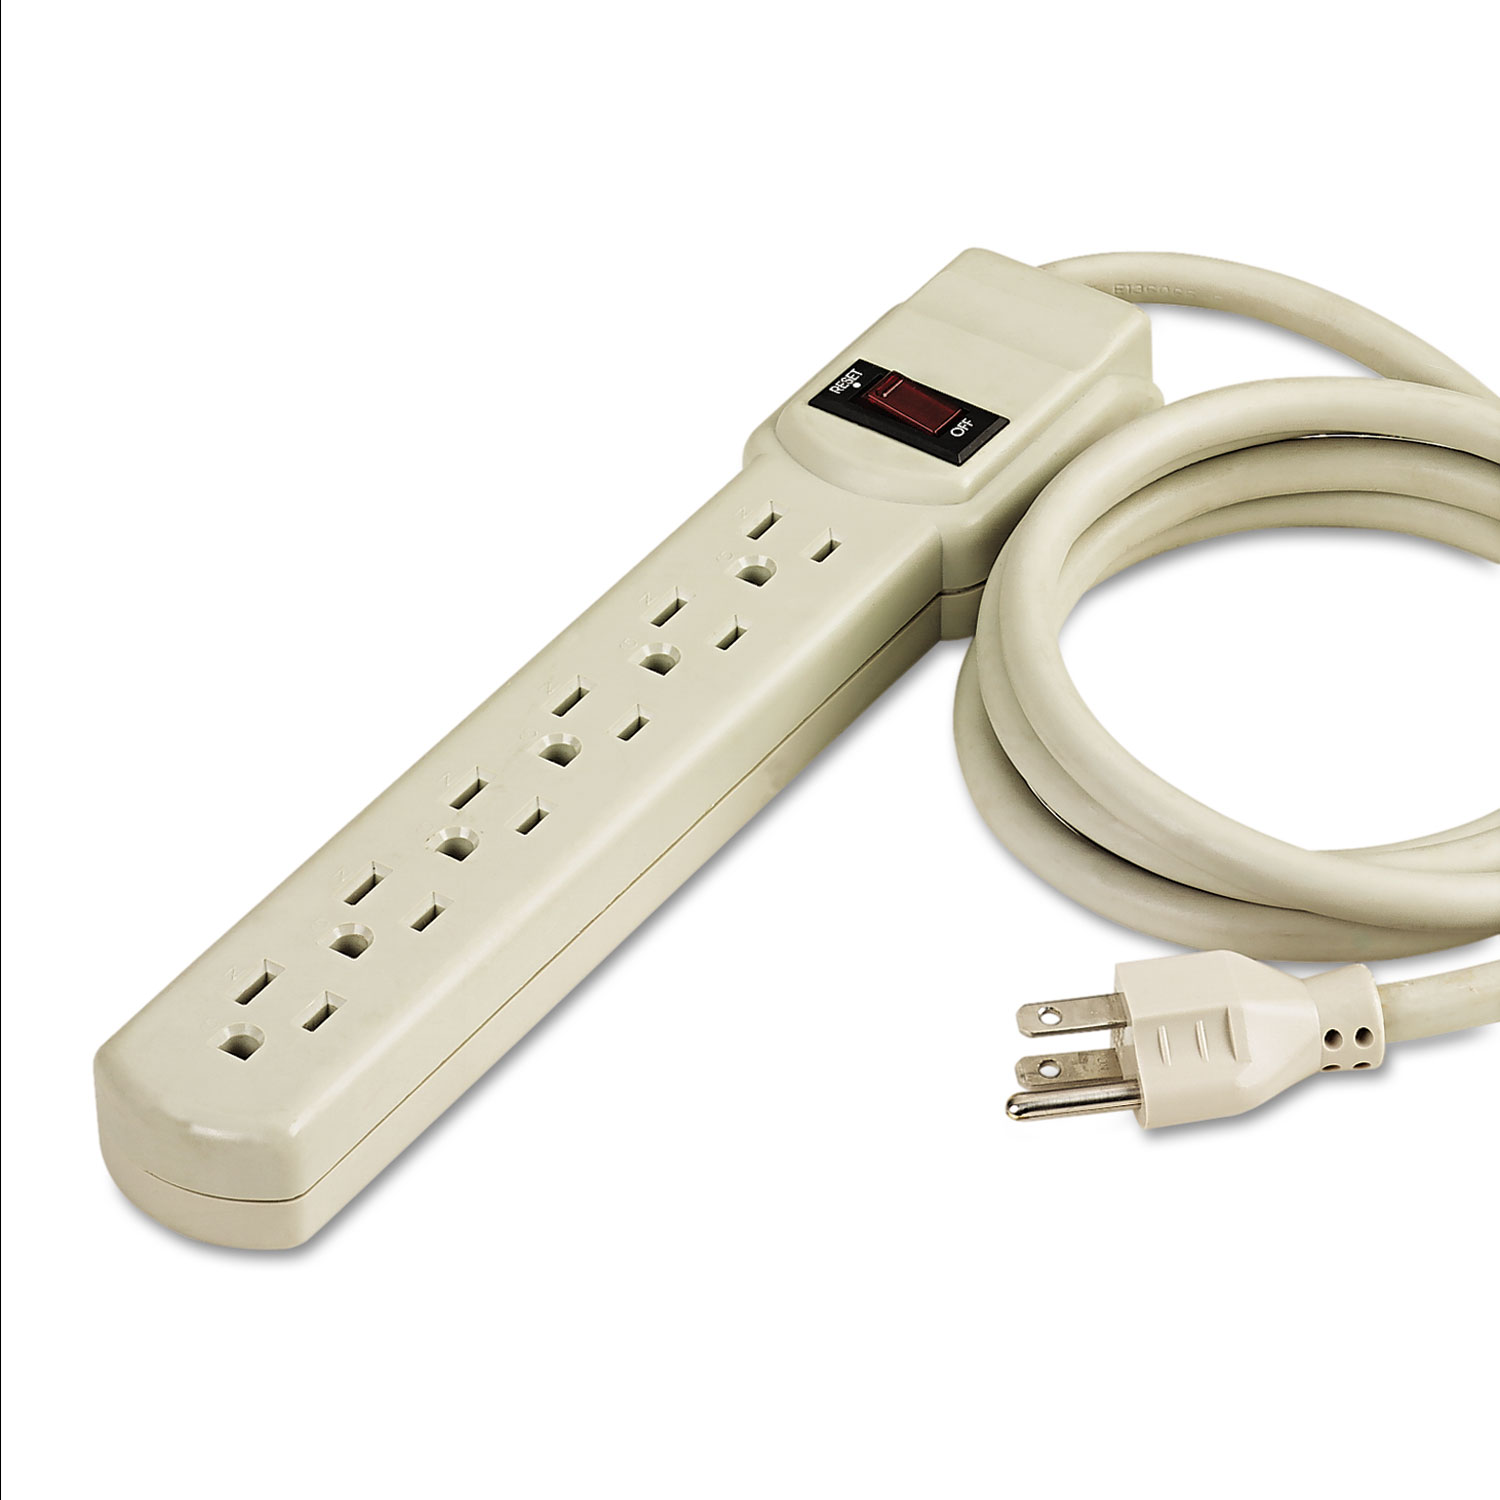 Six-Outlet Power Strip, 4-Foot Cord, 1-15/16 x 10-3/16 x 1-3/16, Ivory